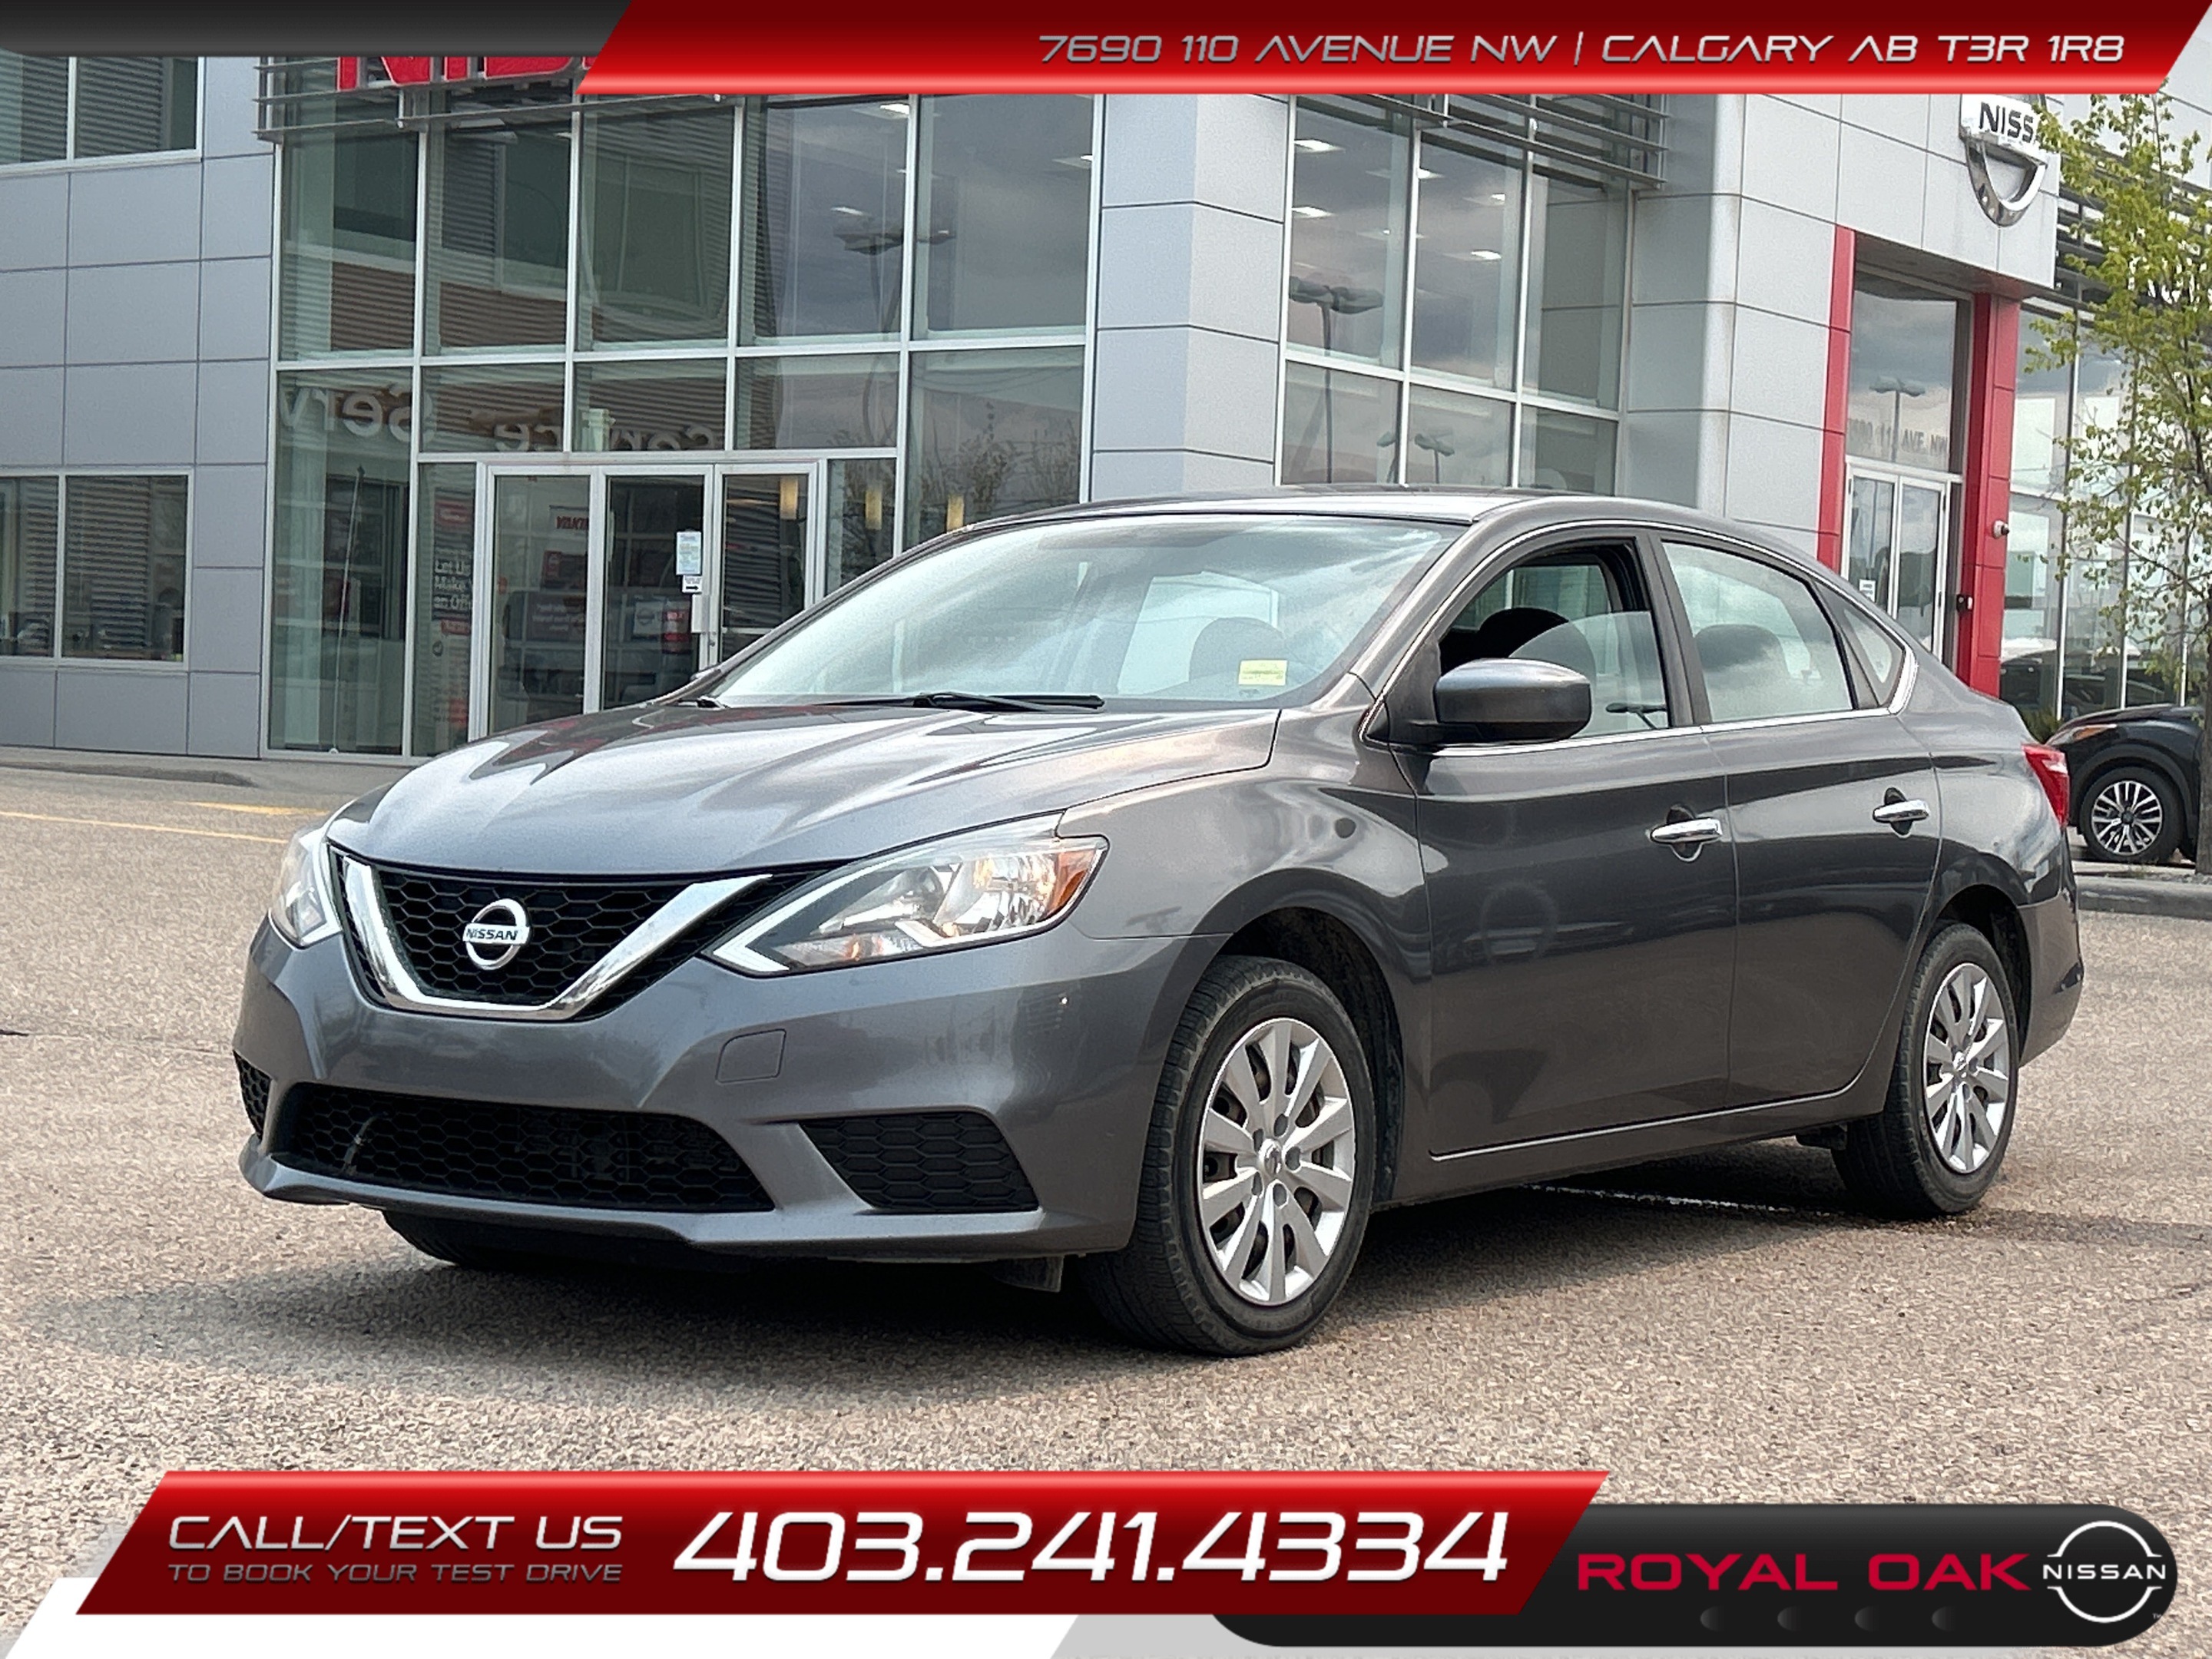 2016 Nissan Sentra S - Automatic